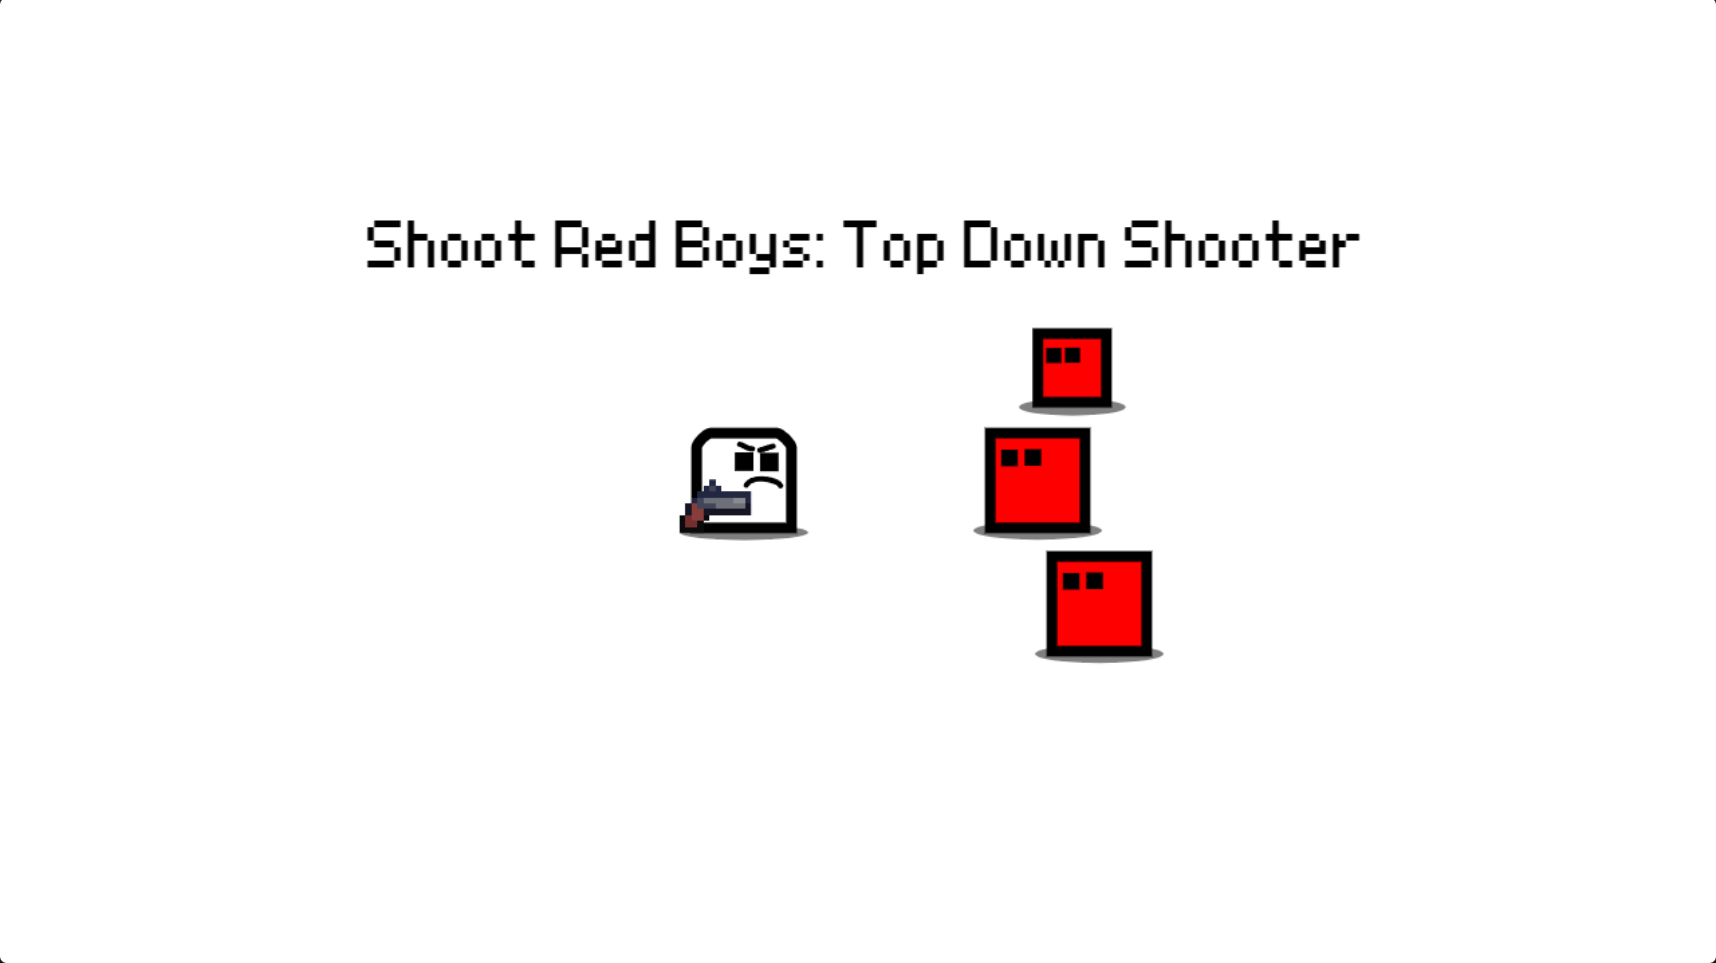 Shoot Red Boys: Top Down Shooter